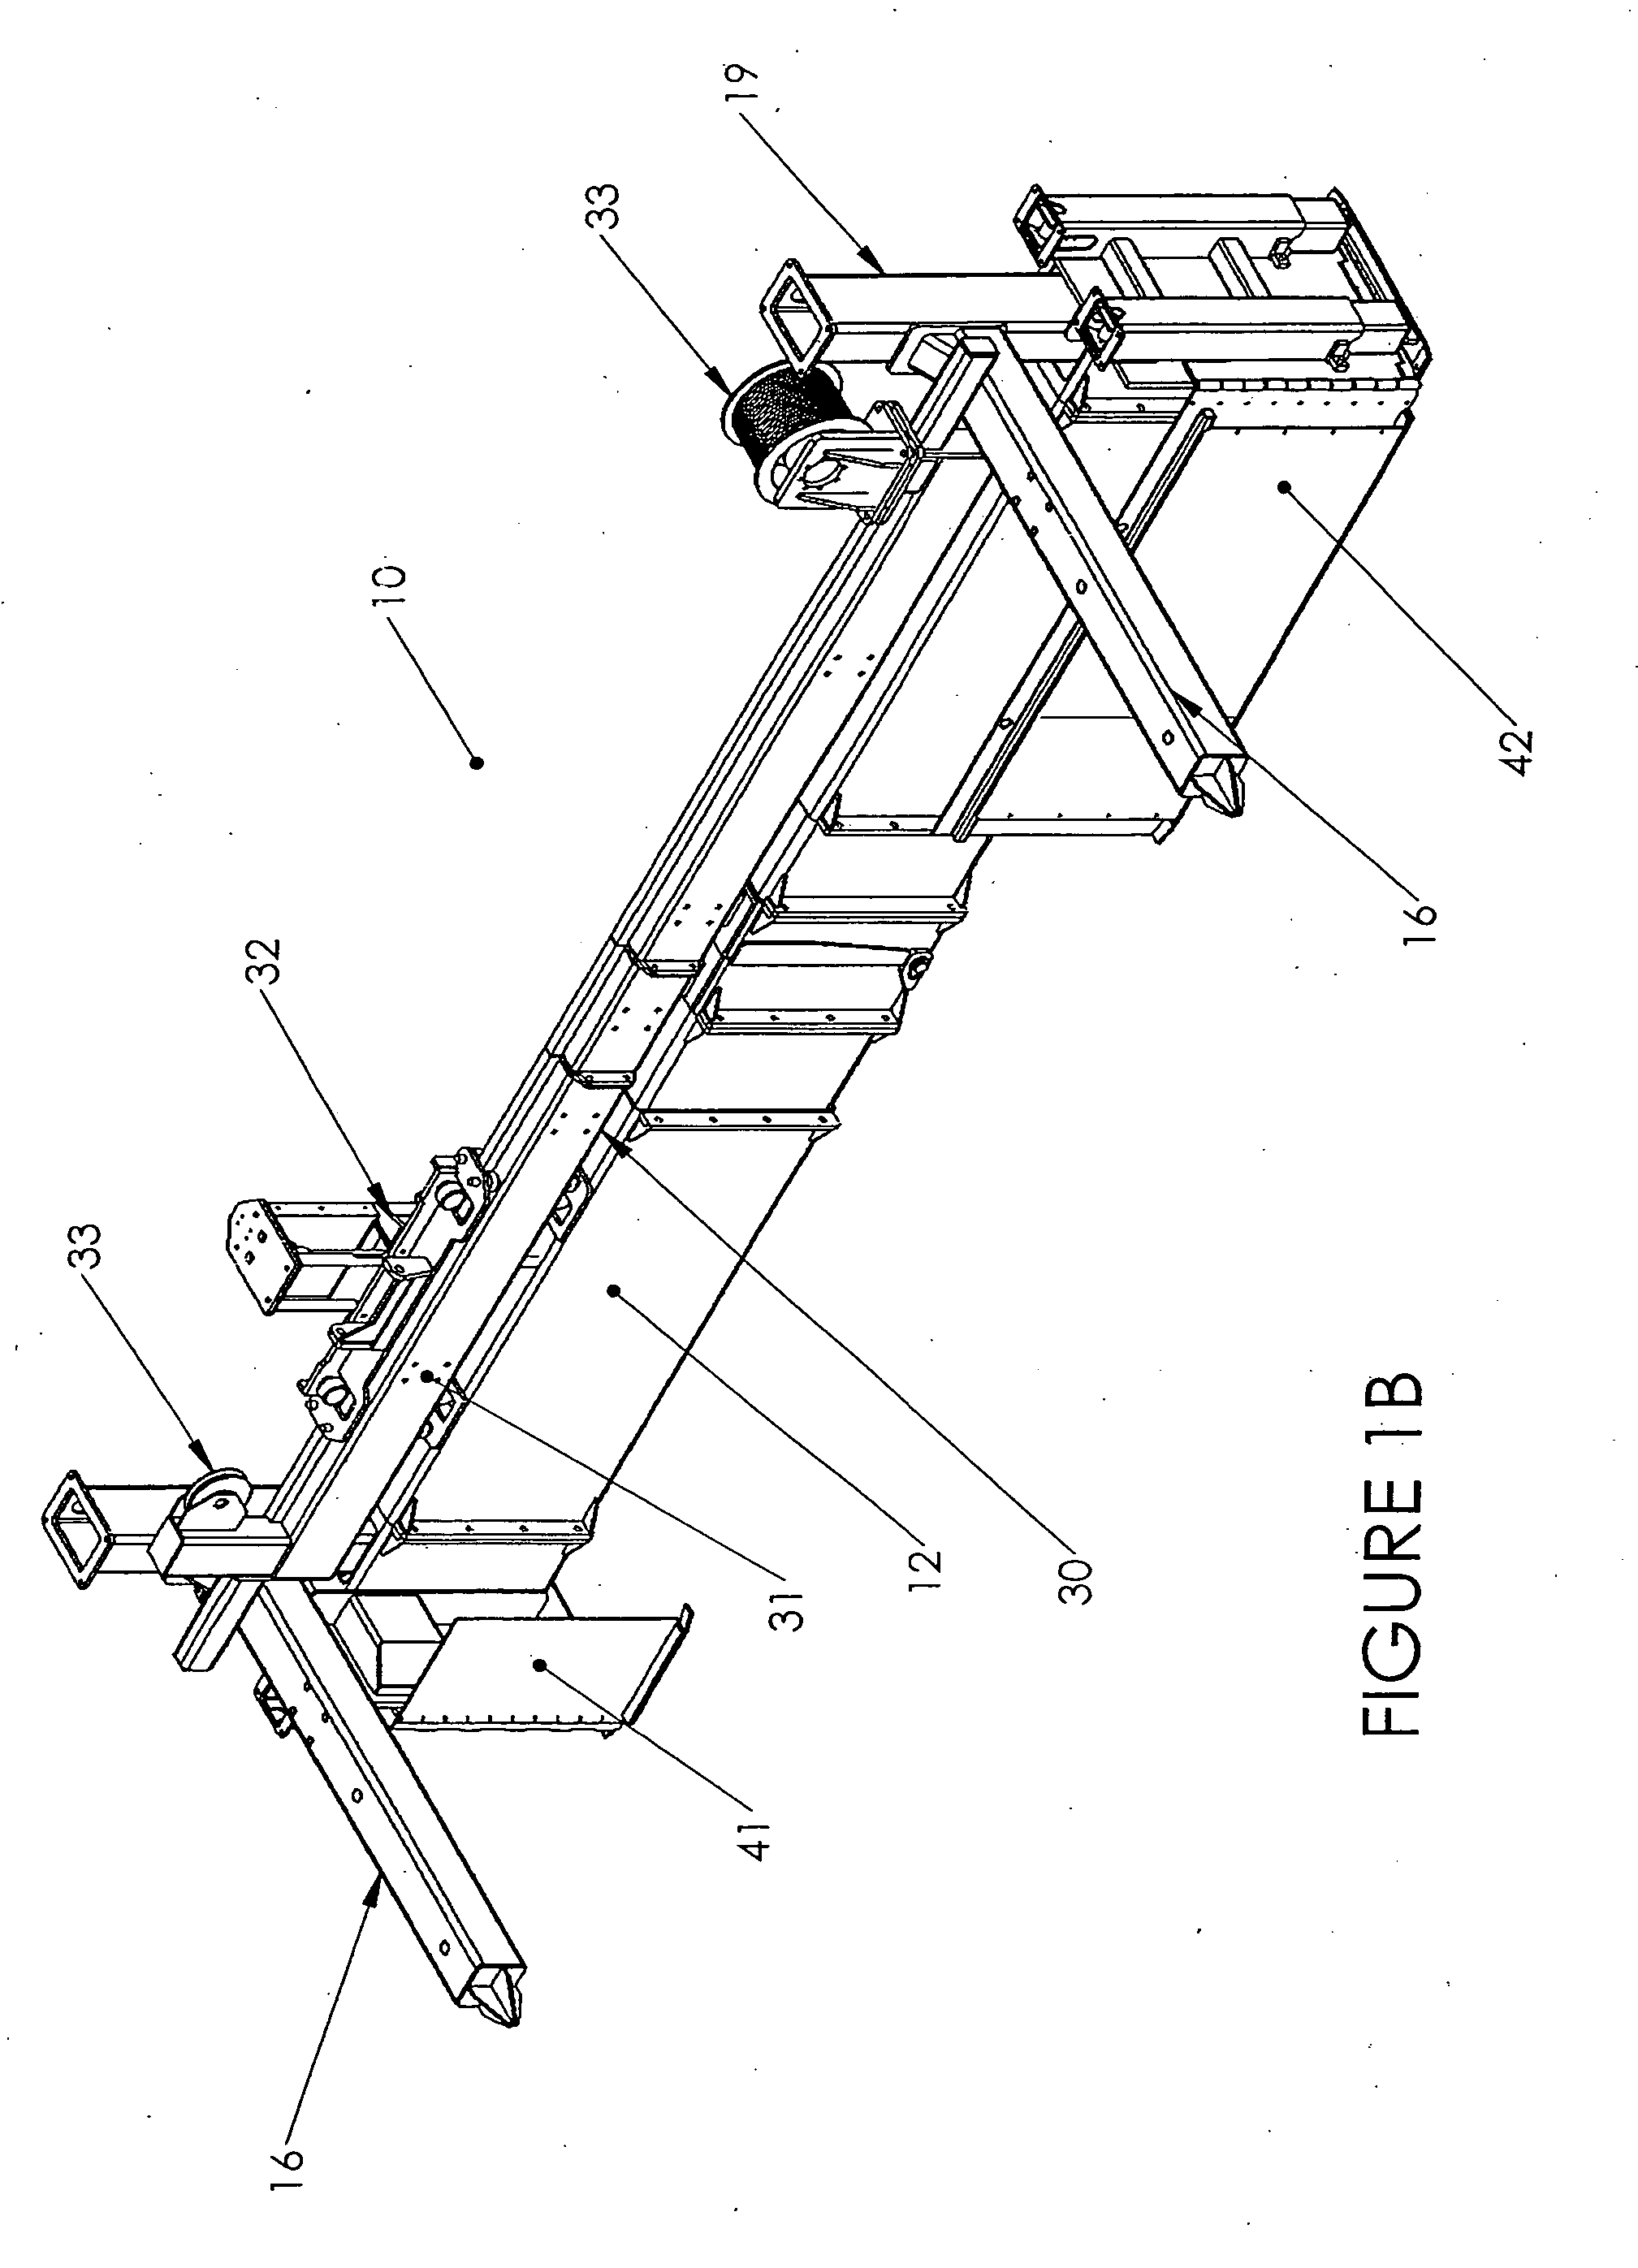 Strike off beam and spreader plow assembly for placer spreader